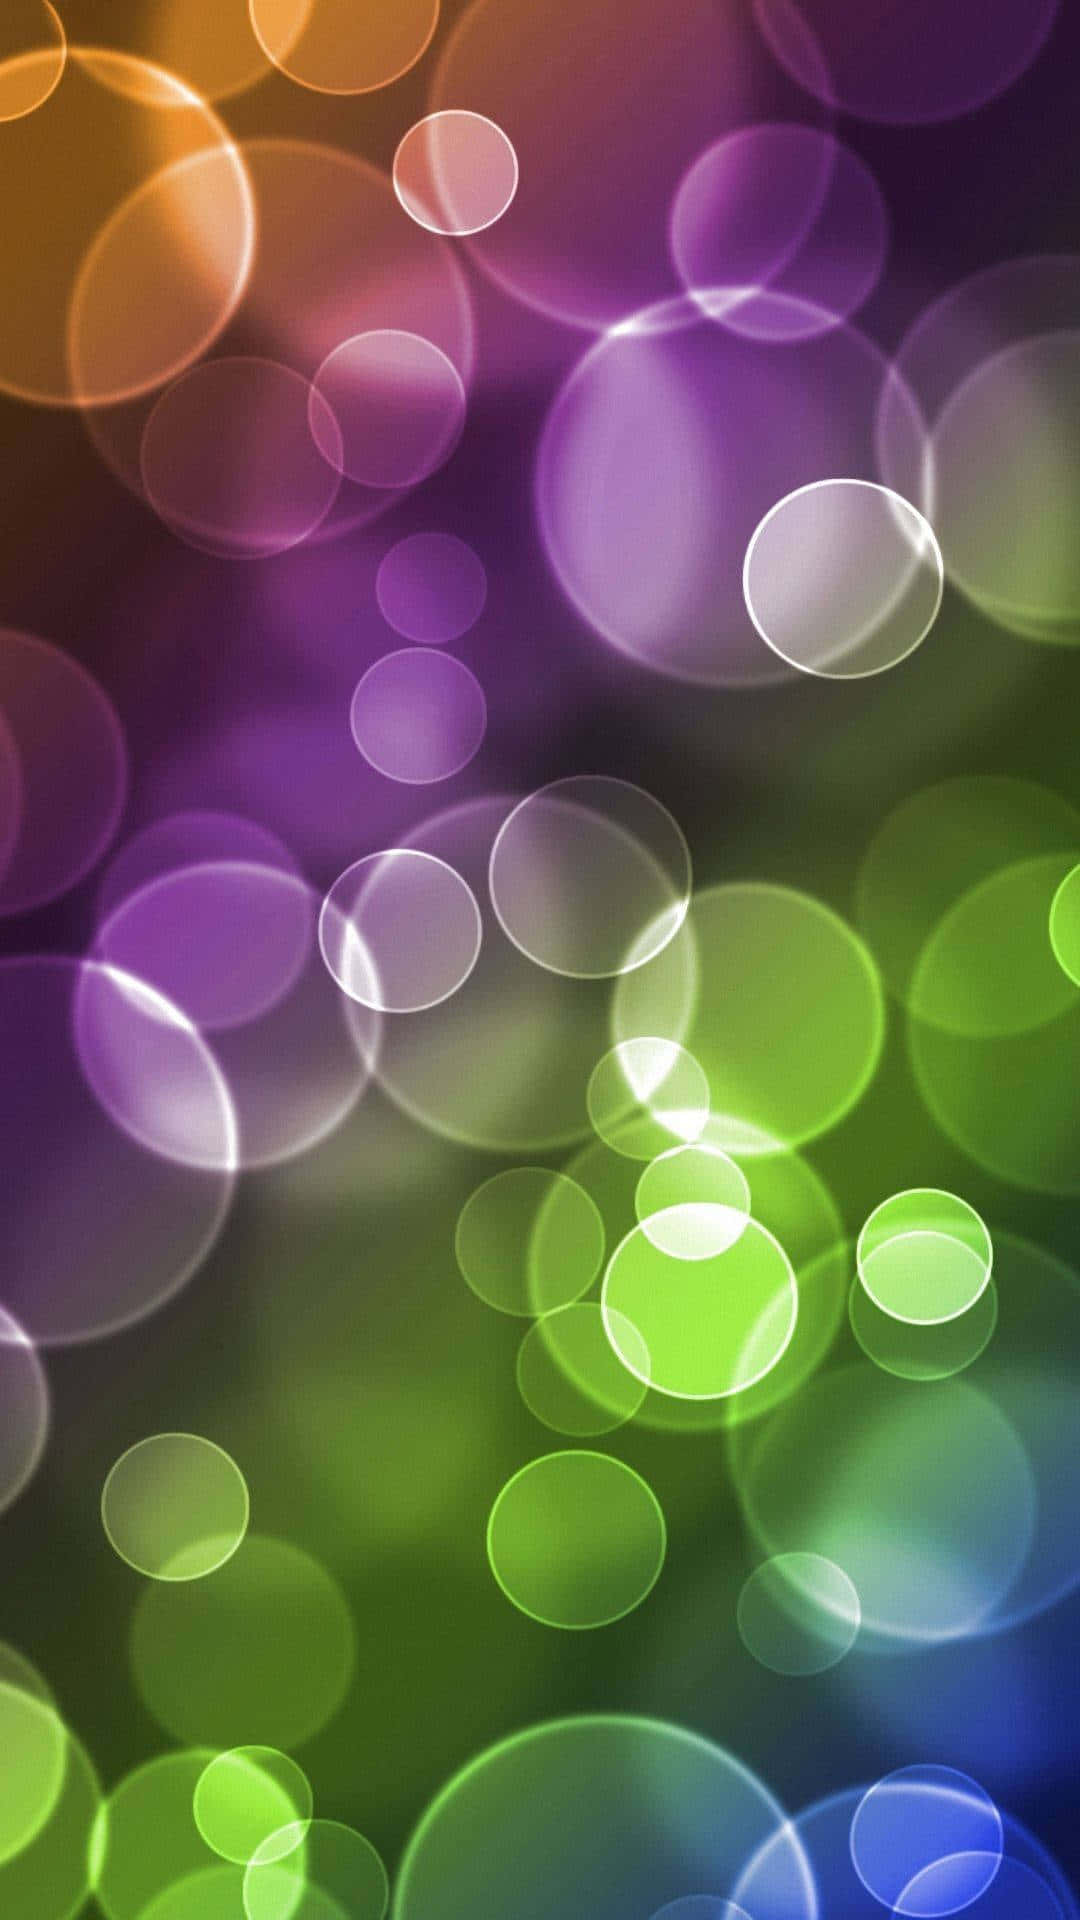 A Colorful Background With Circles Of Light Wallpaper